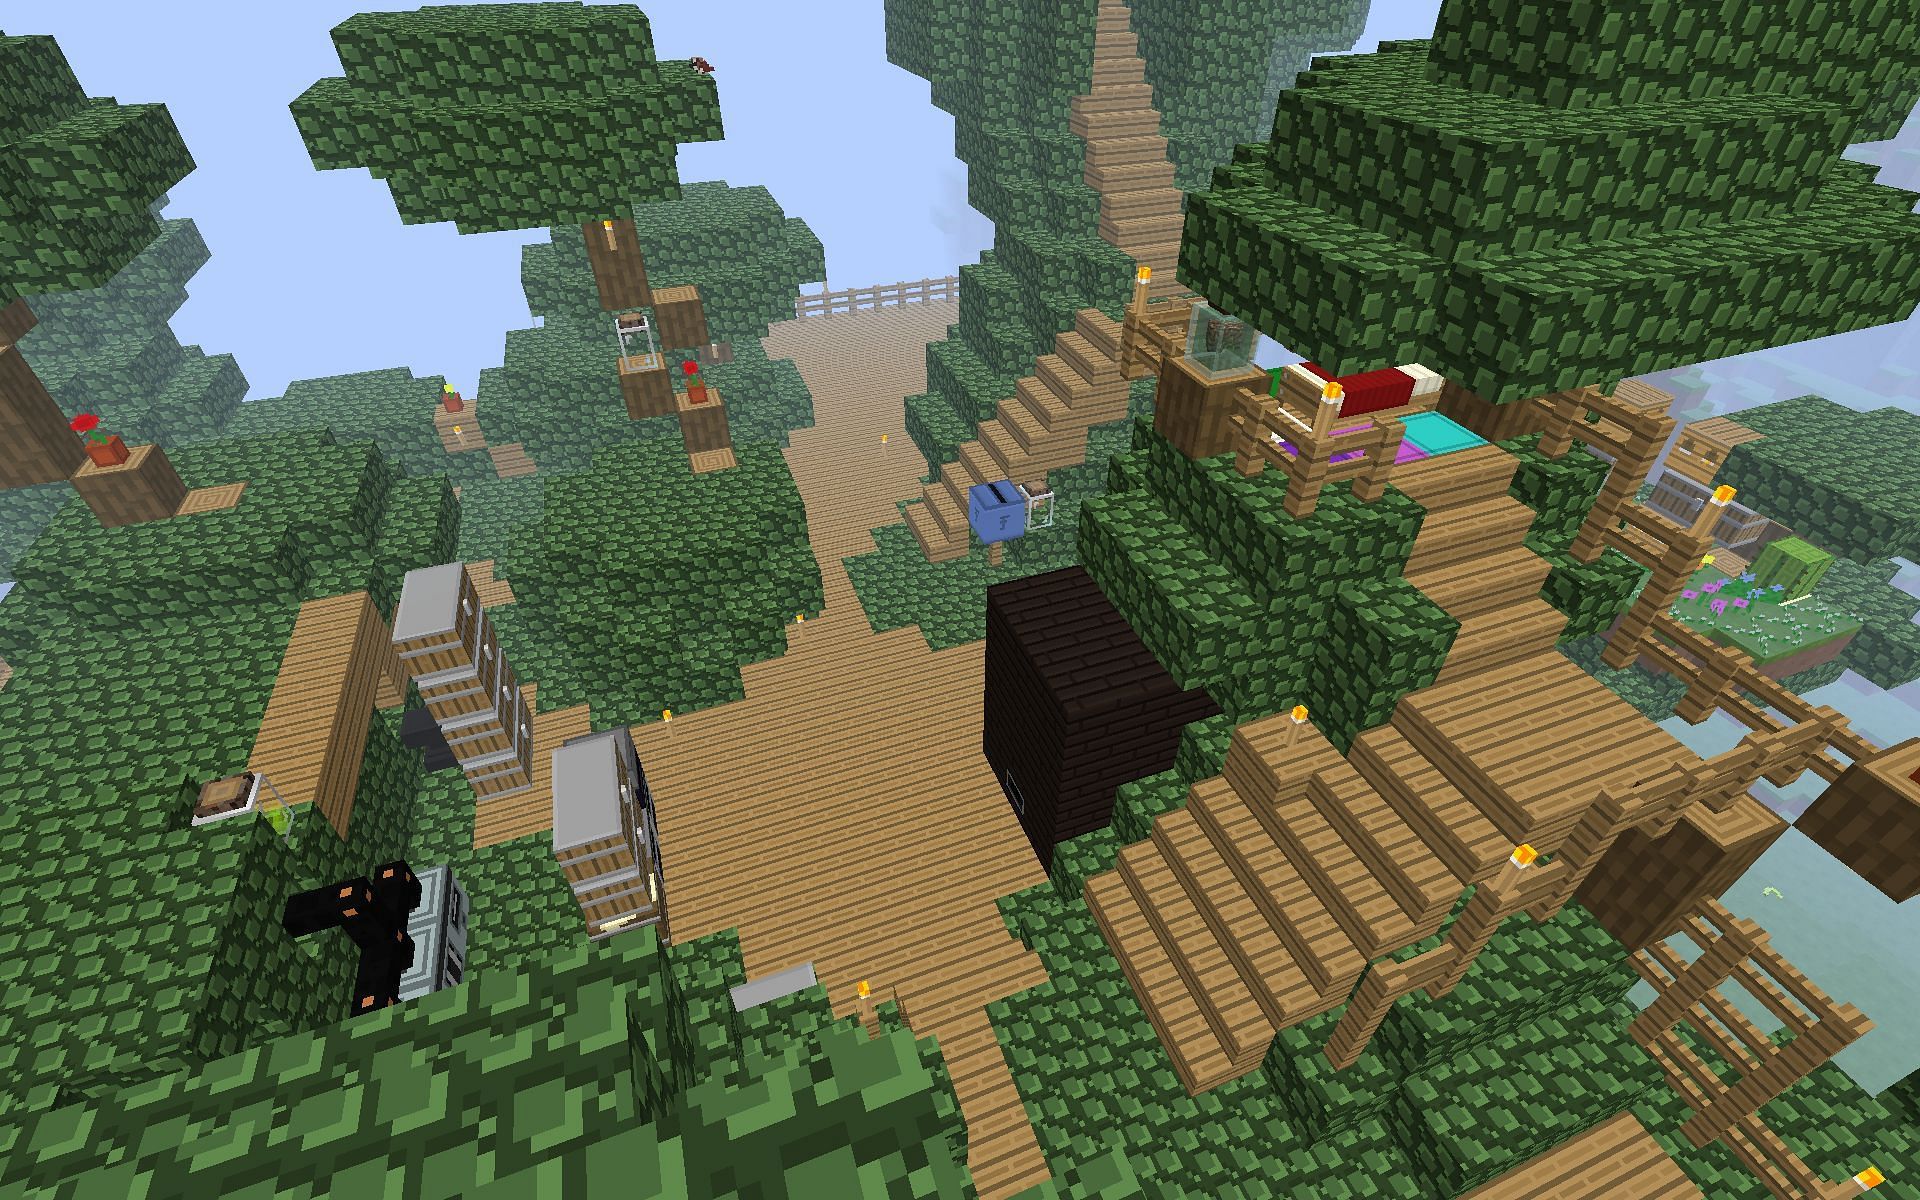 Minecraft treehouses can be as complex or as simple as a player desires (Image via Mojang)